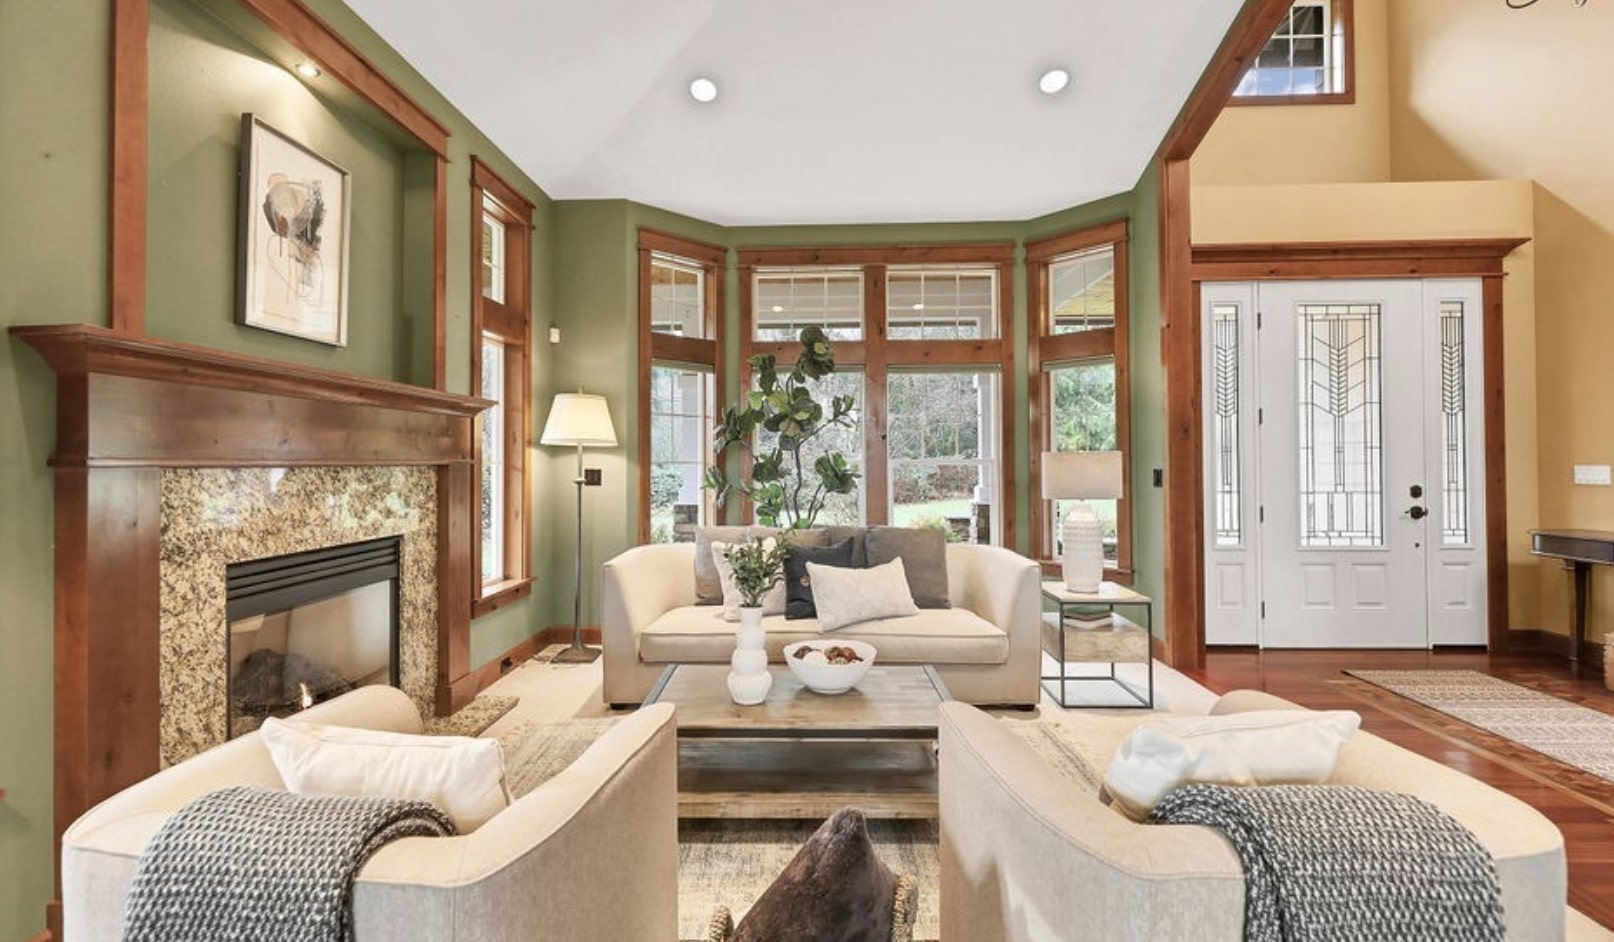 Handsome wood work showcases the cozy seating arrangement of this formal living room